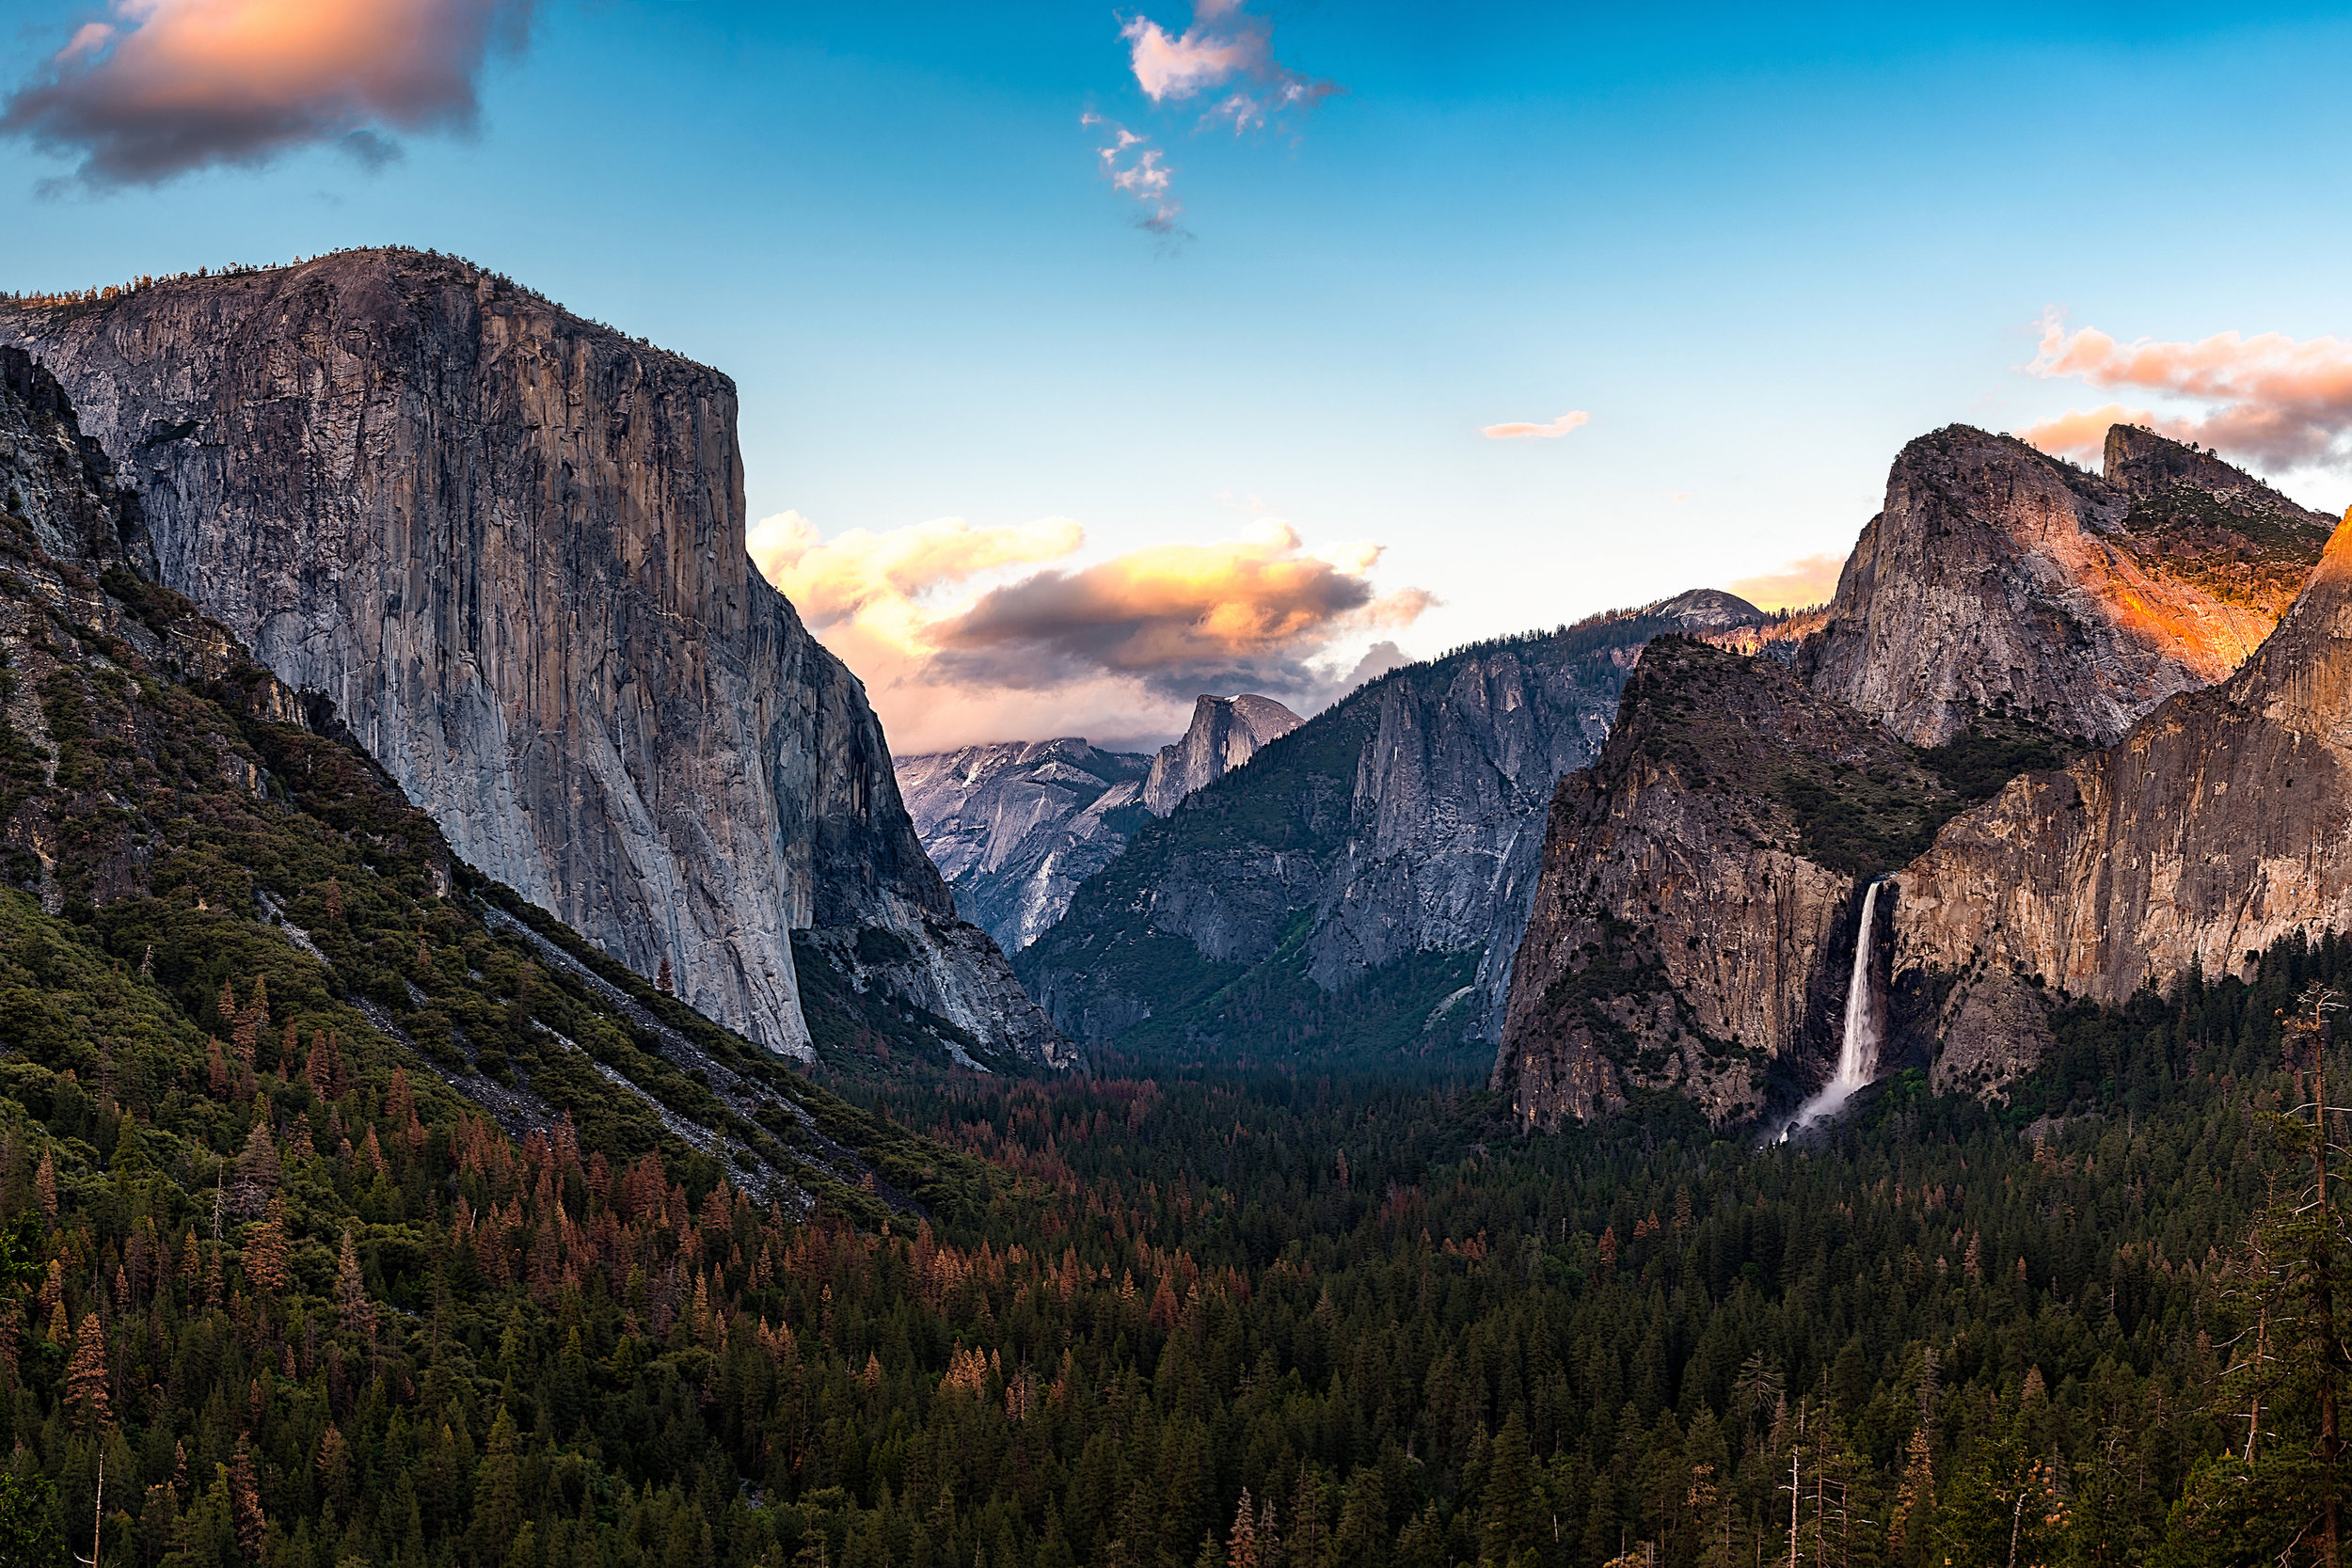 The spectacular tunnel view looks . Yosemite Tunnel View Compelling Imaging Photography